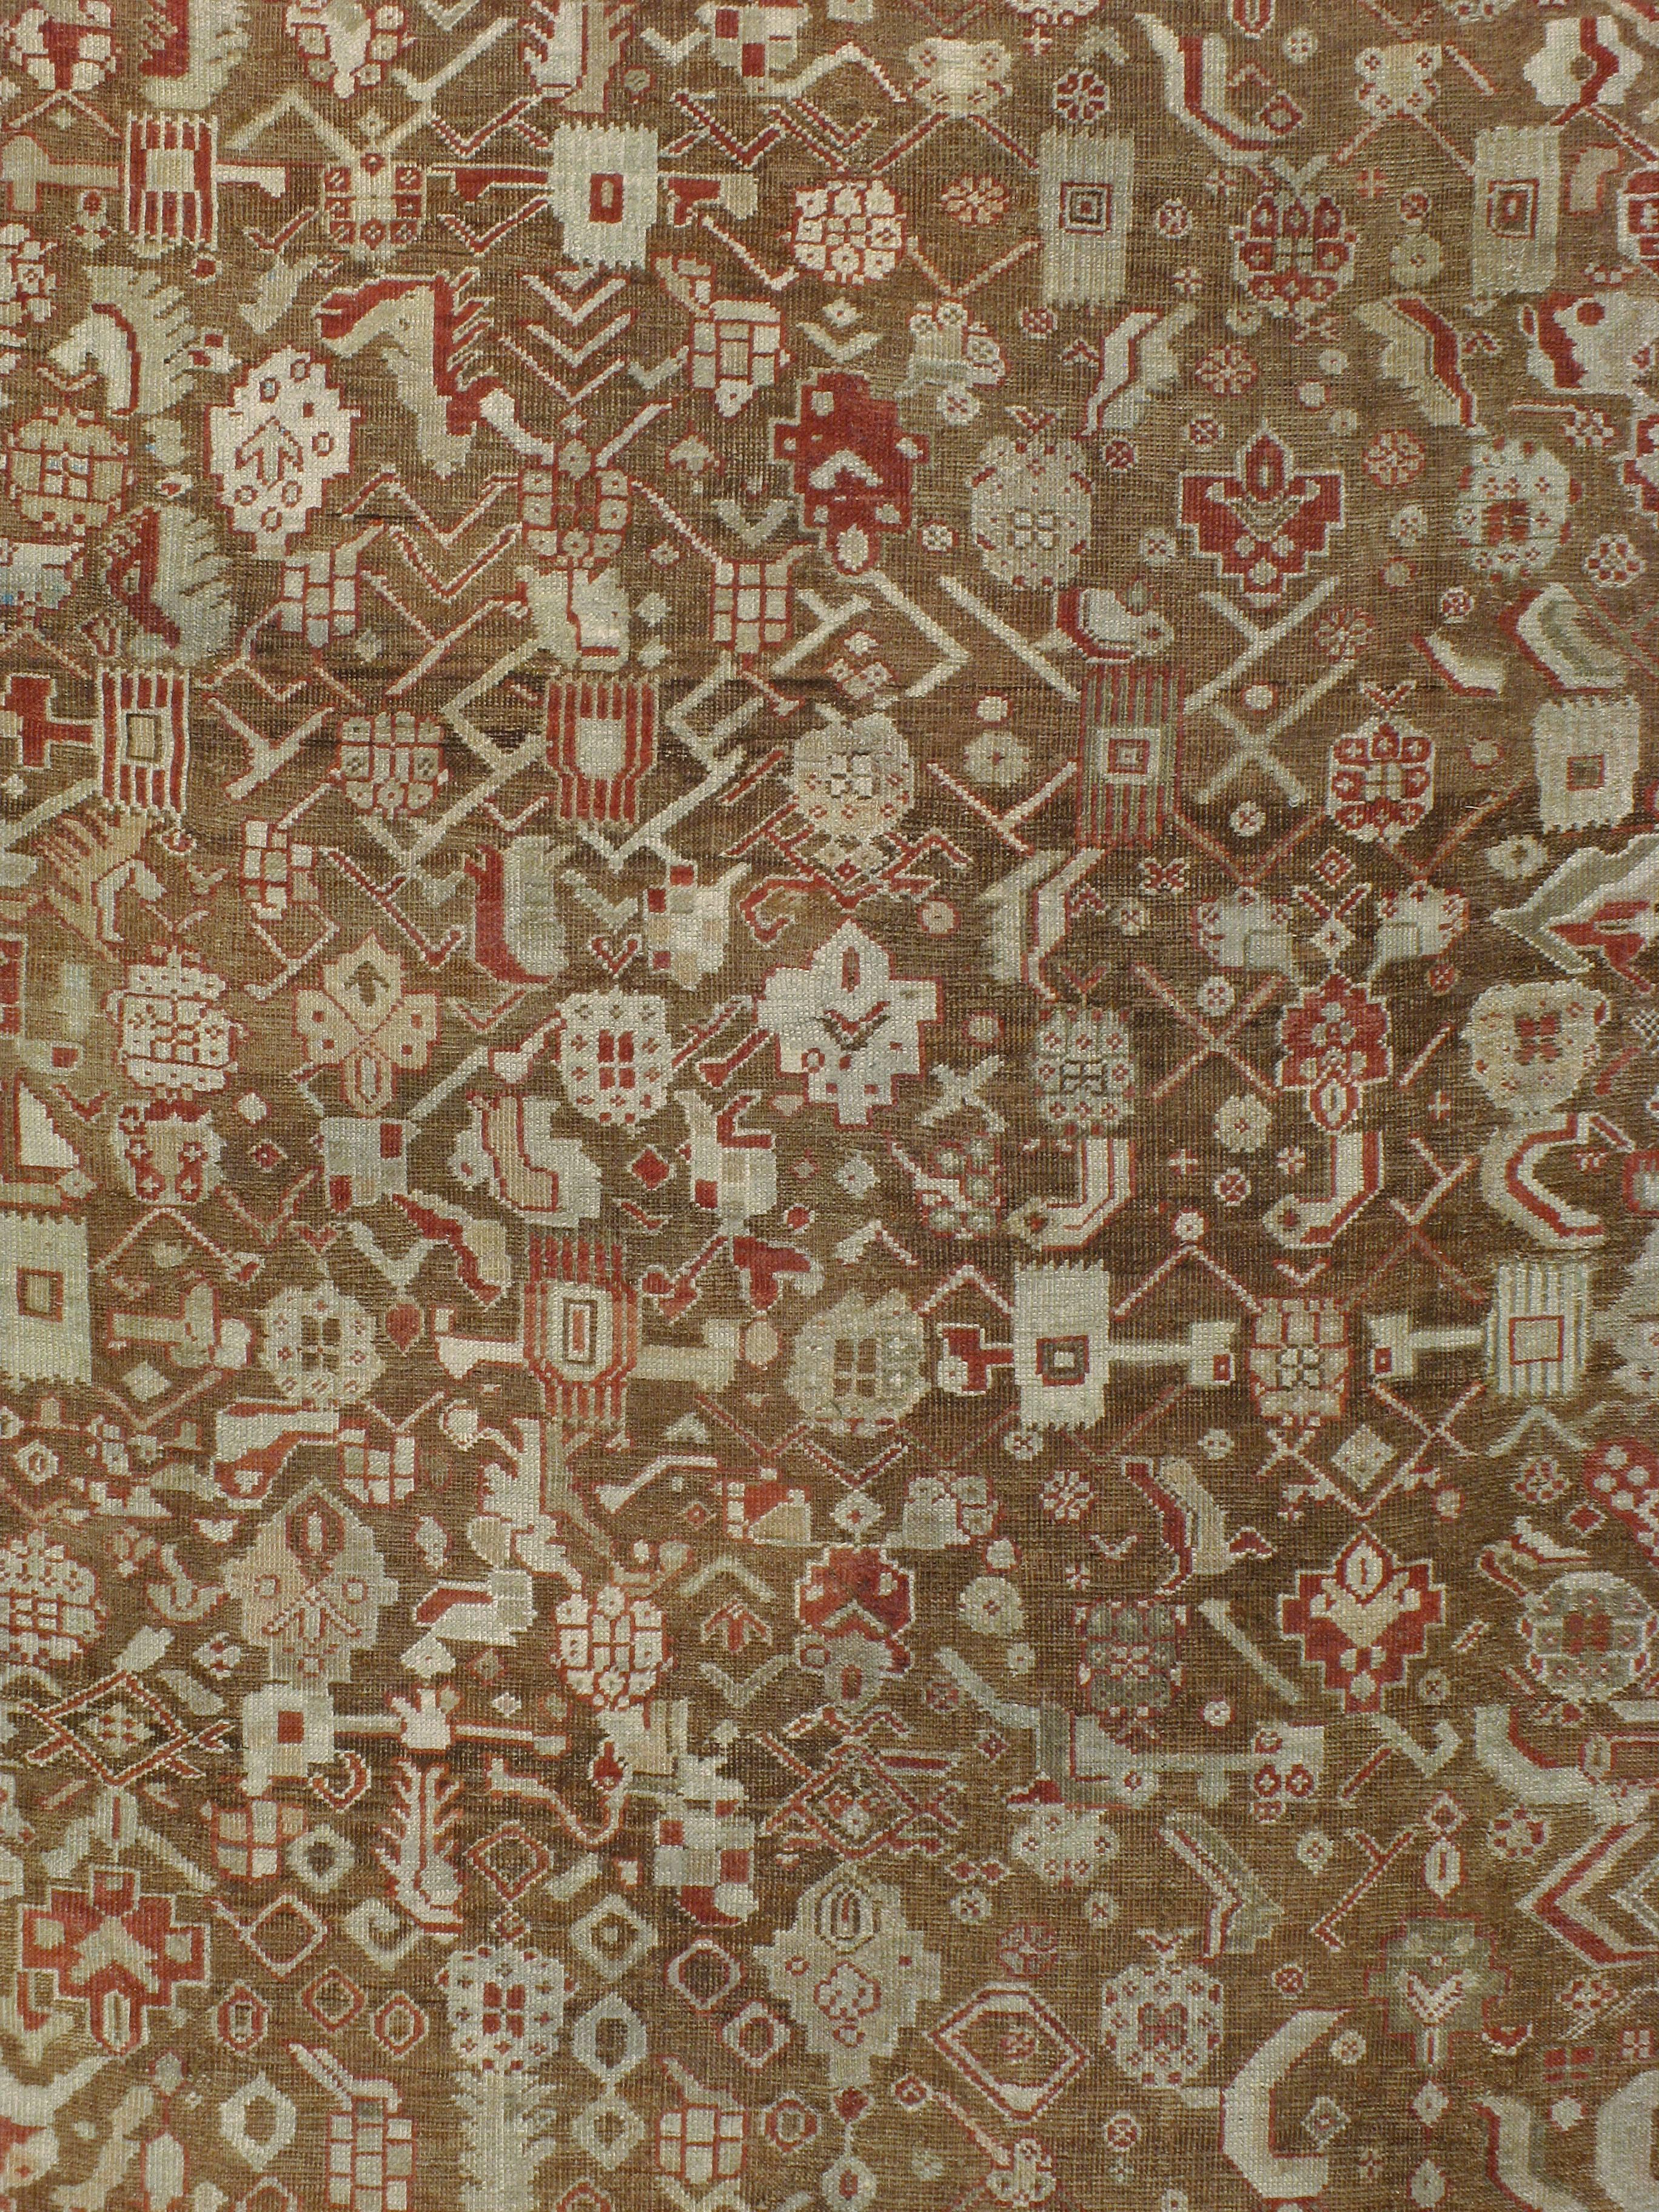 Early 20th century Turkish Ghourdes carpet.